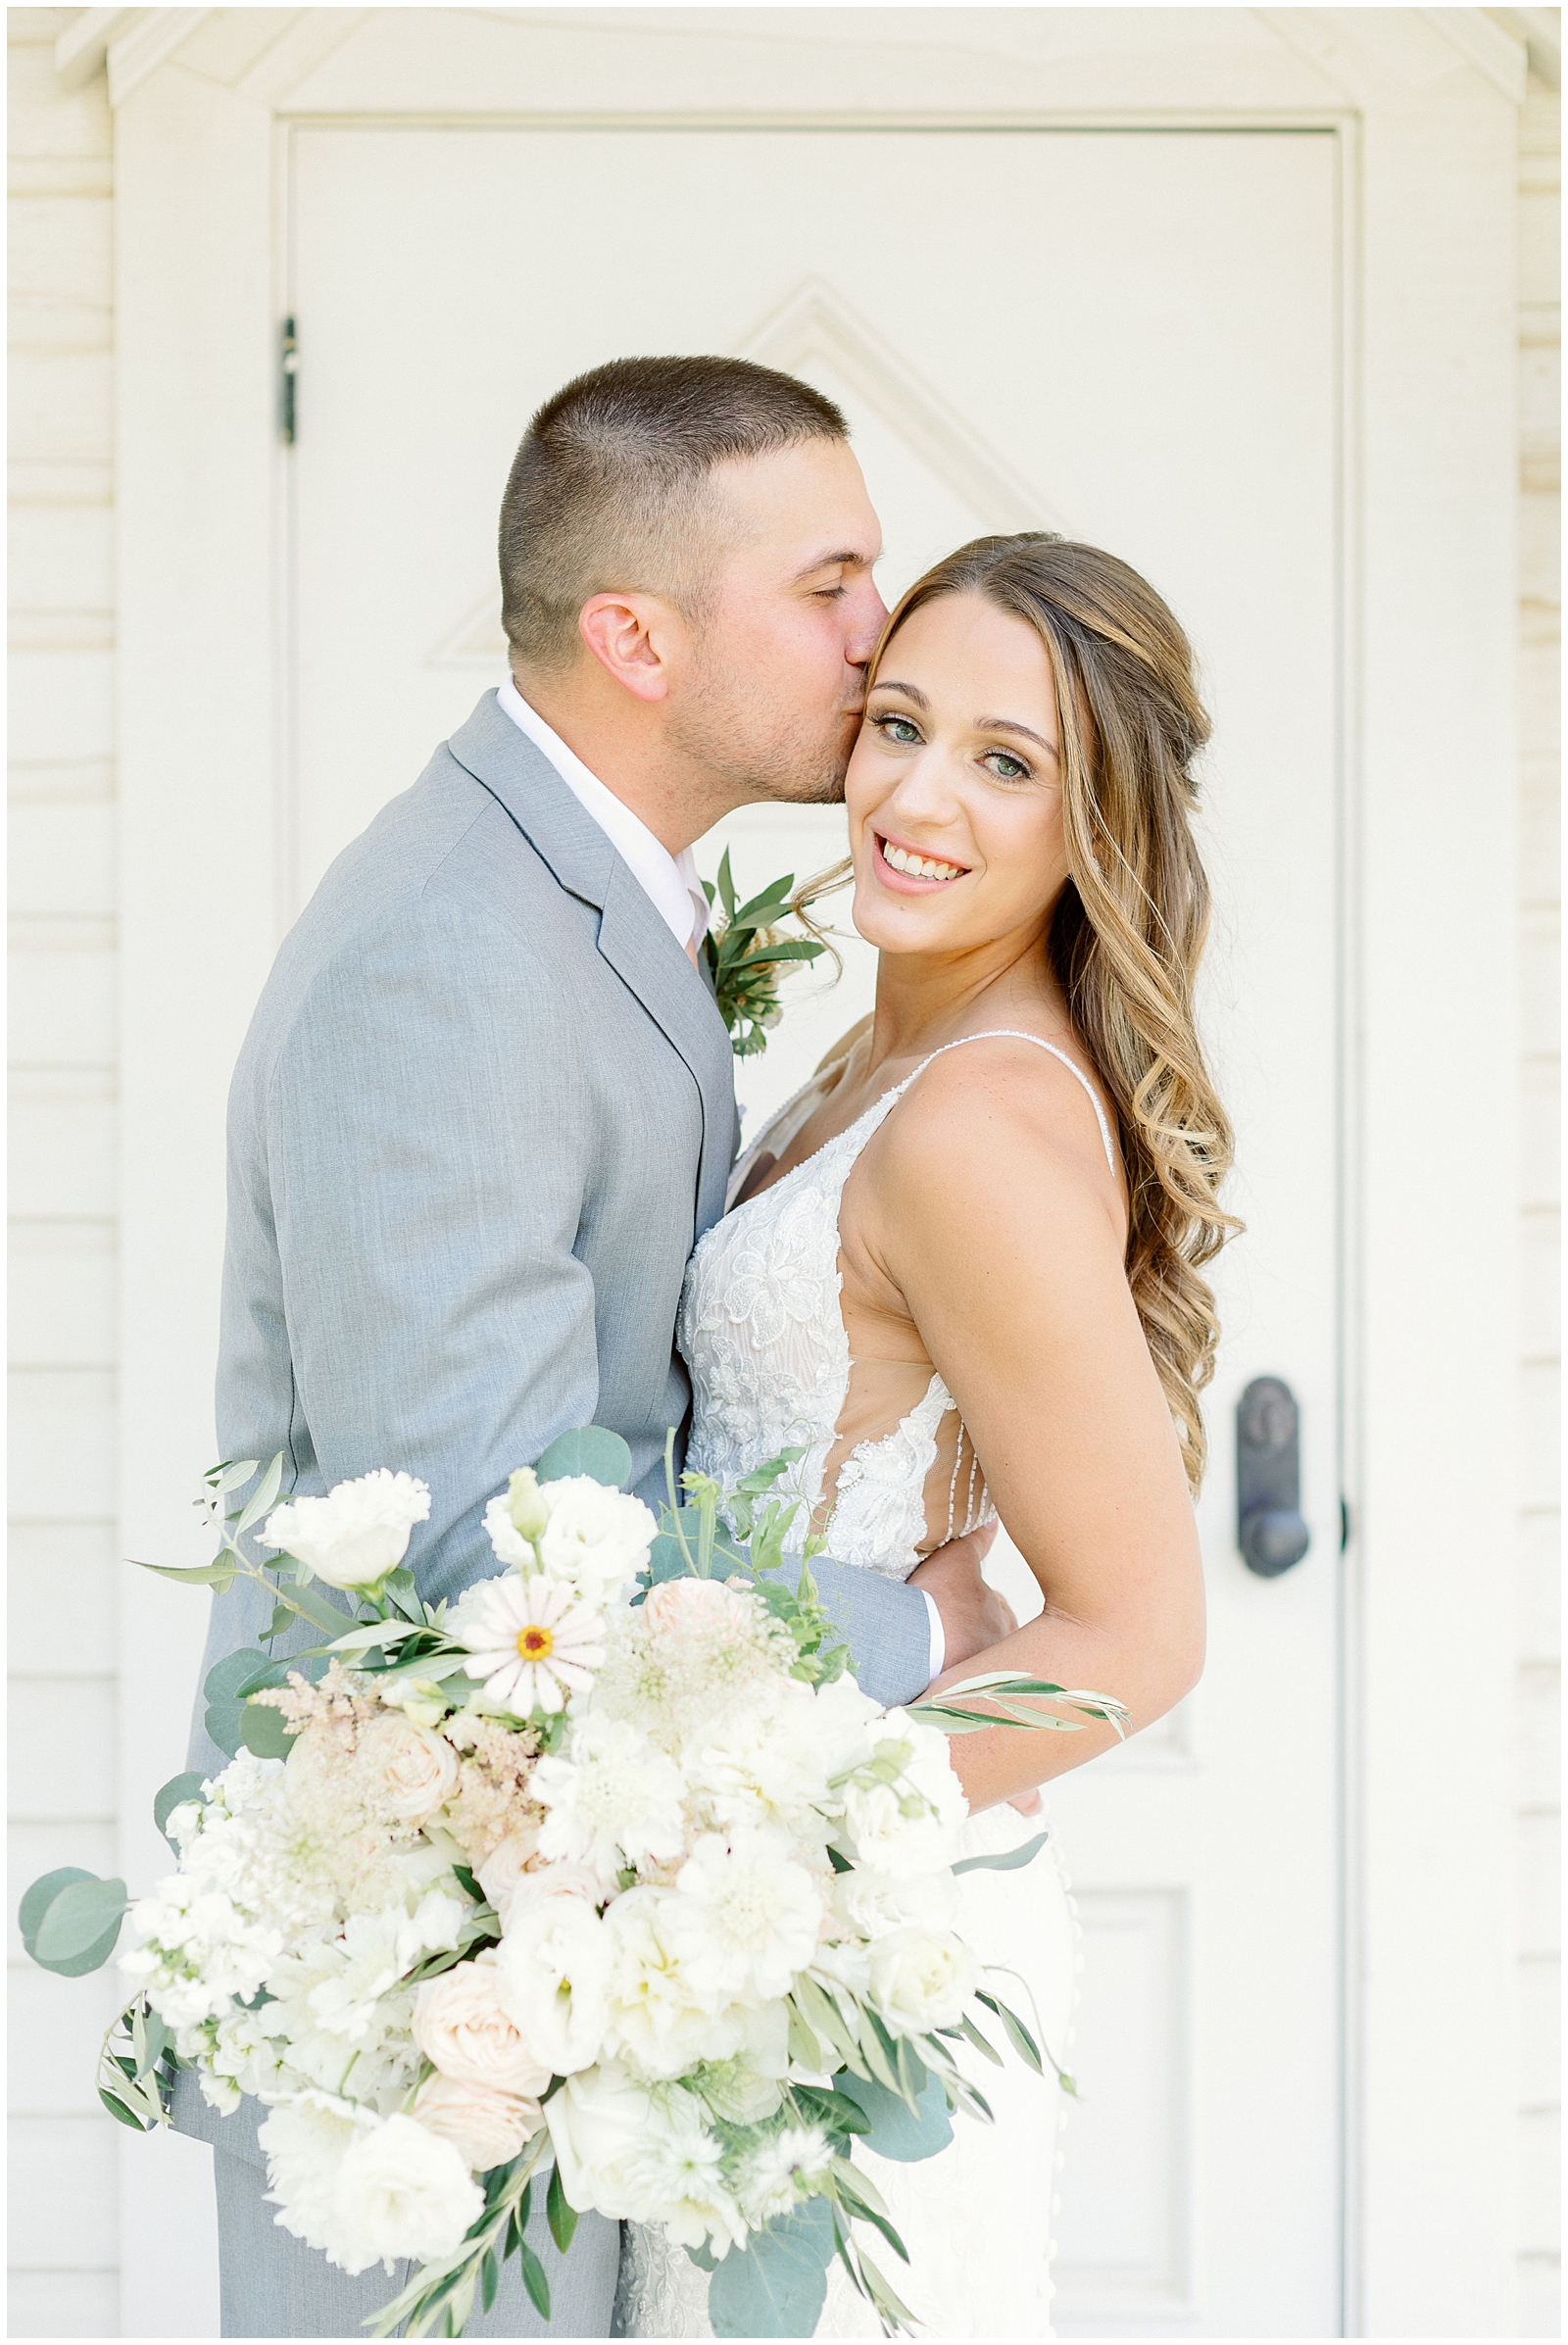 Bride and Groom First Look Portraits at Blush Still Water Hollow Wedding